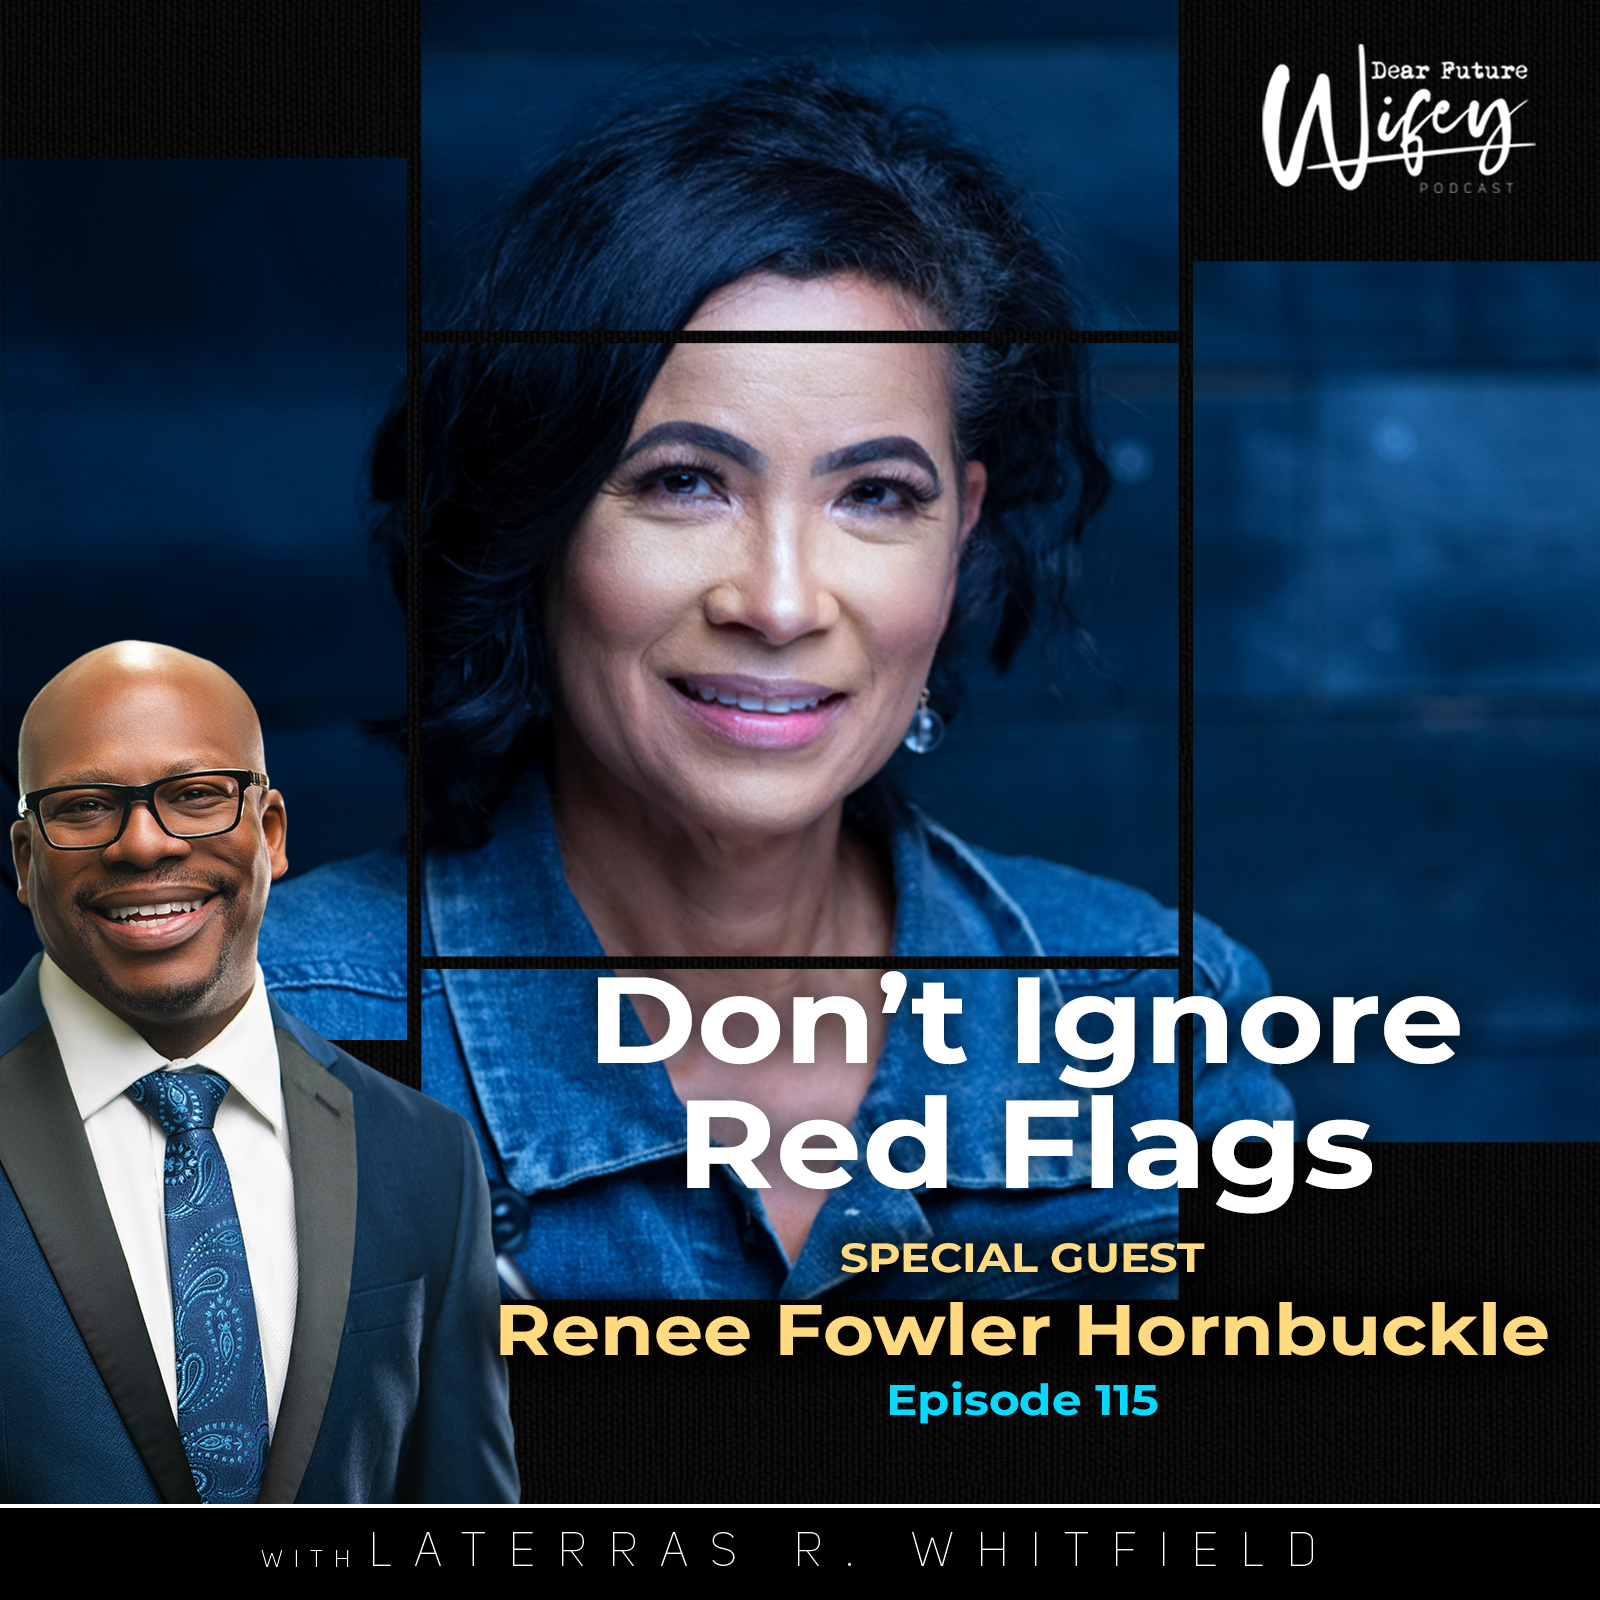 Don't Ignore Red Flags (Guest: Renee Fowler Hornbuckle)